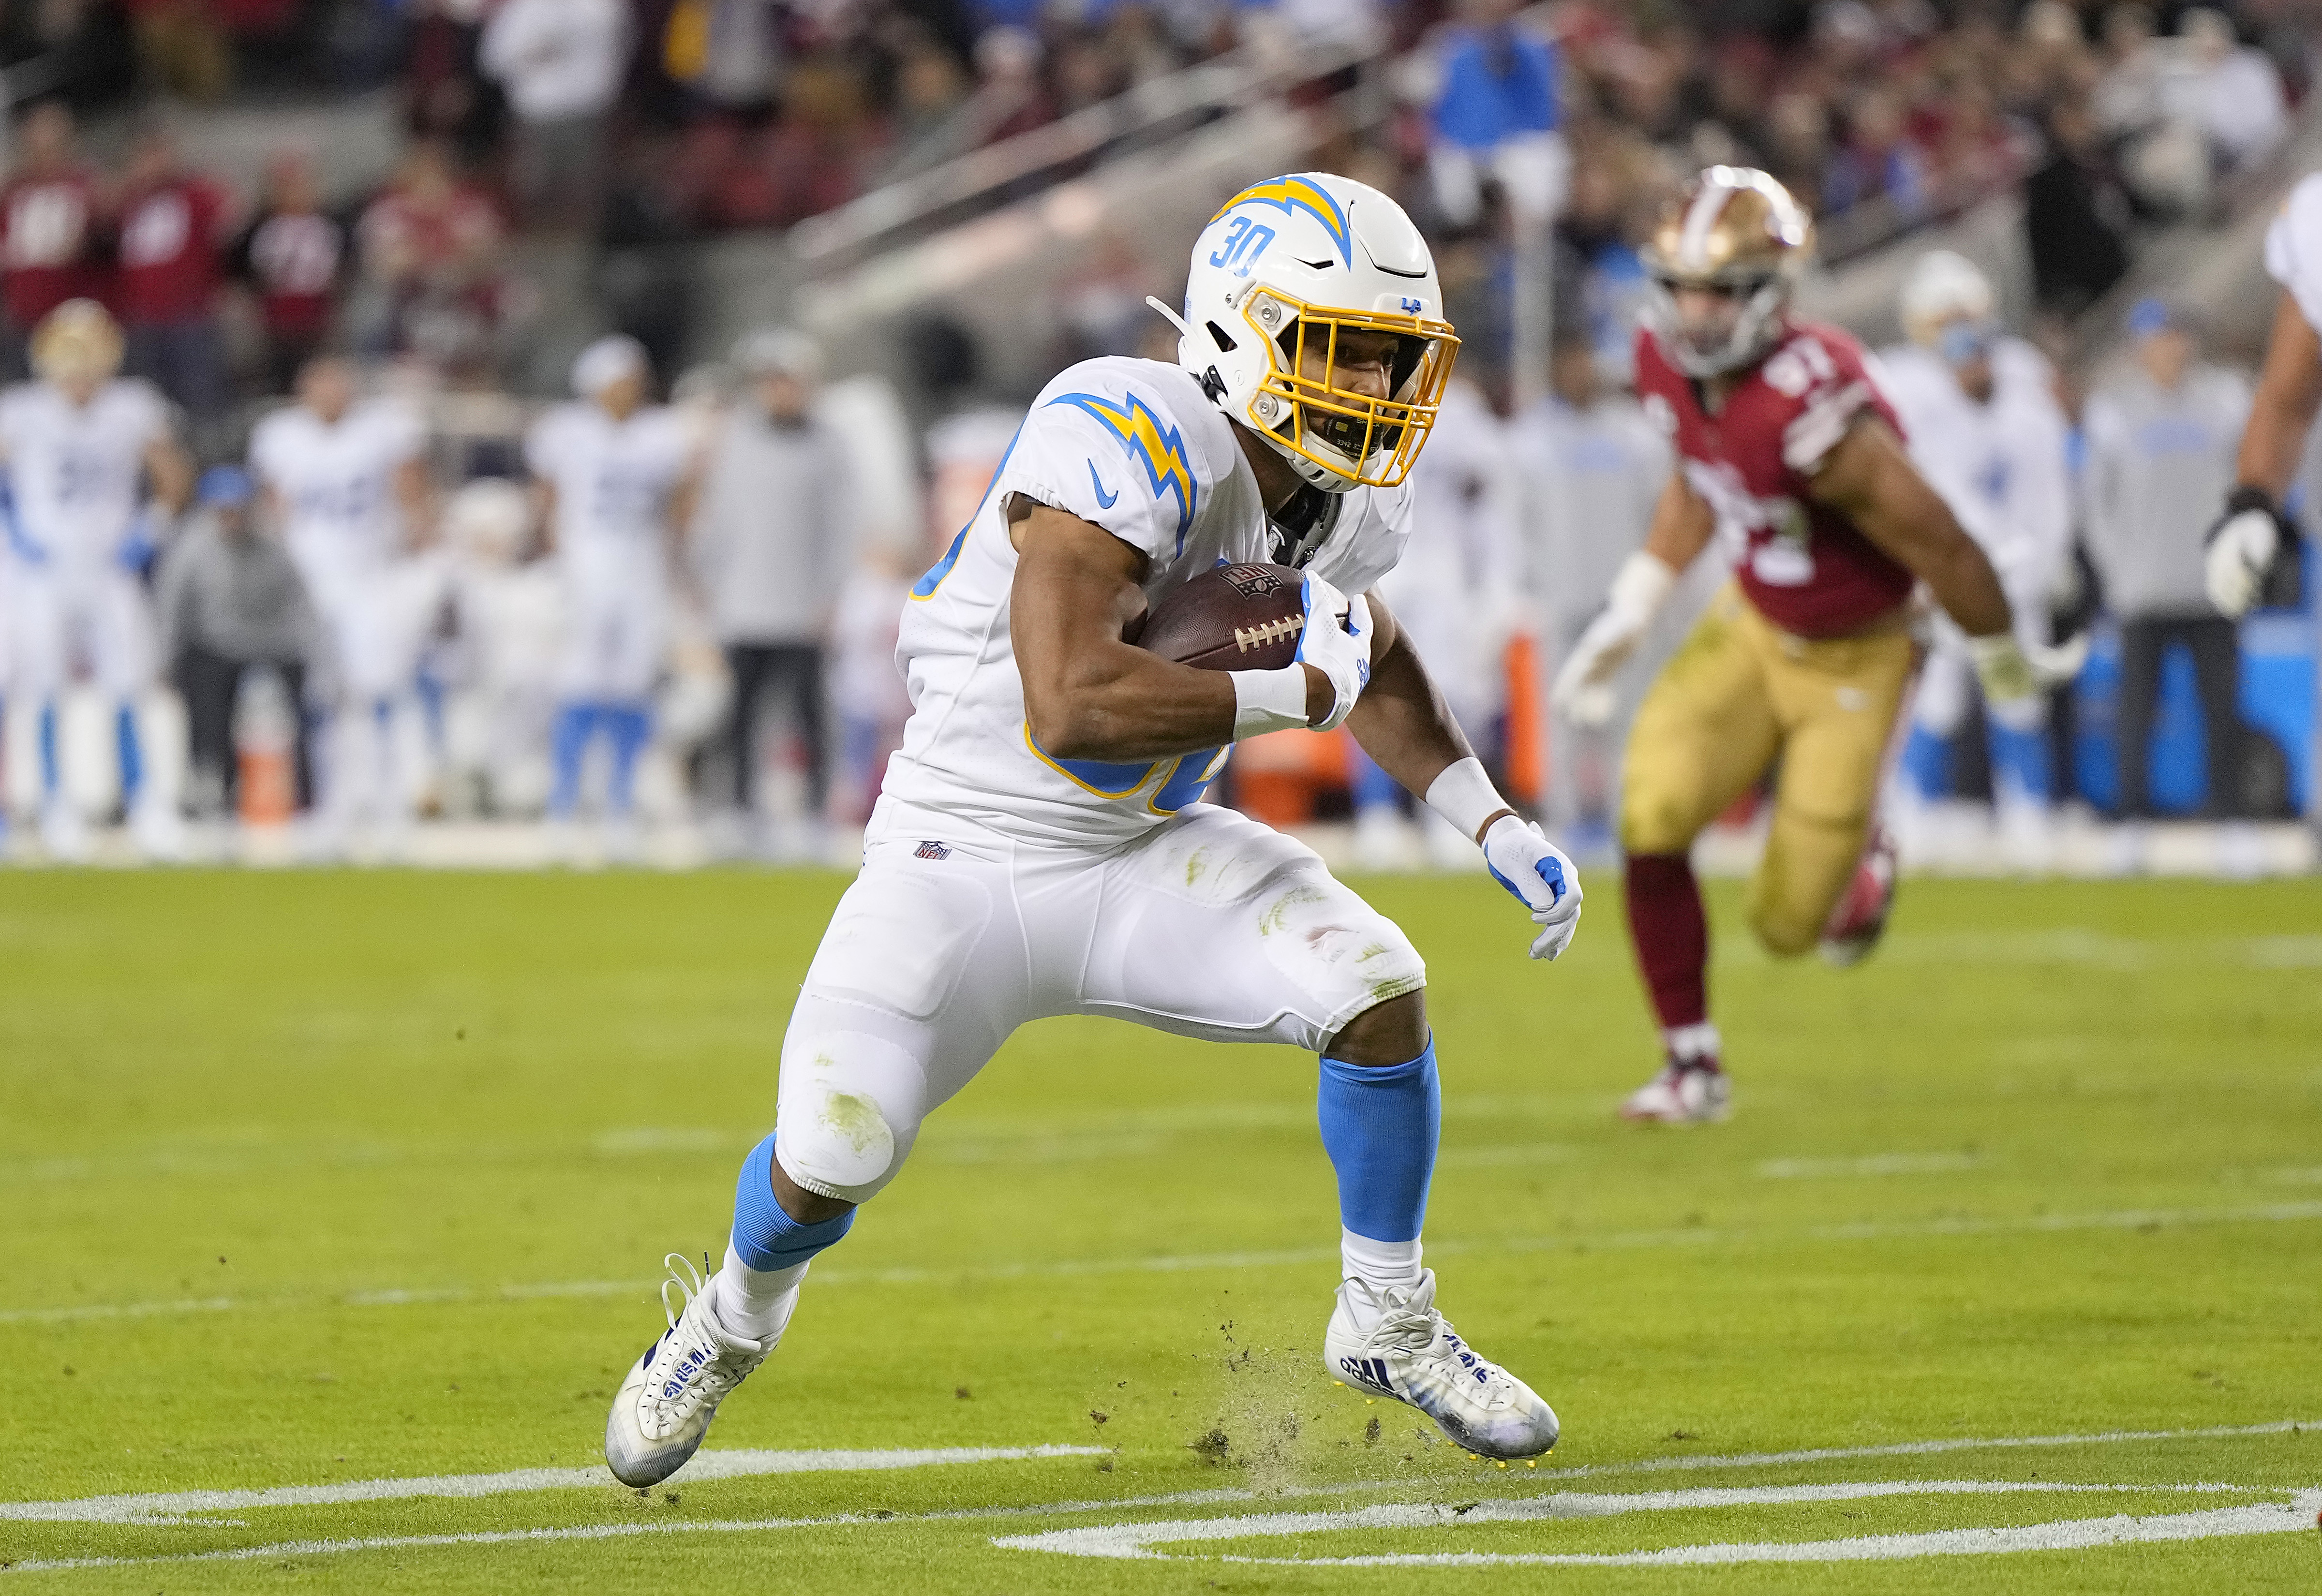 Austin Ekeler #30 of the Los Angeles Chargers runs with the ball during the second quarter against the San Francisco 49ers at Levi’s Stadium on November 13, 2022 in Santa Clara, California.